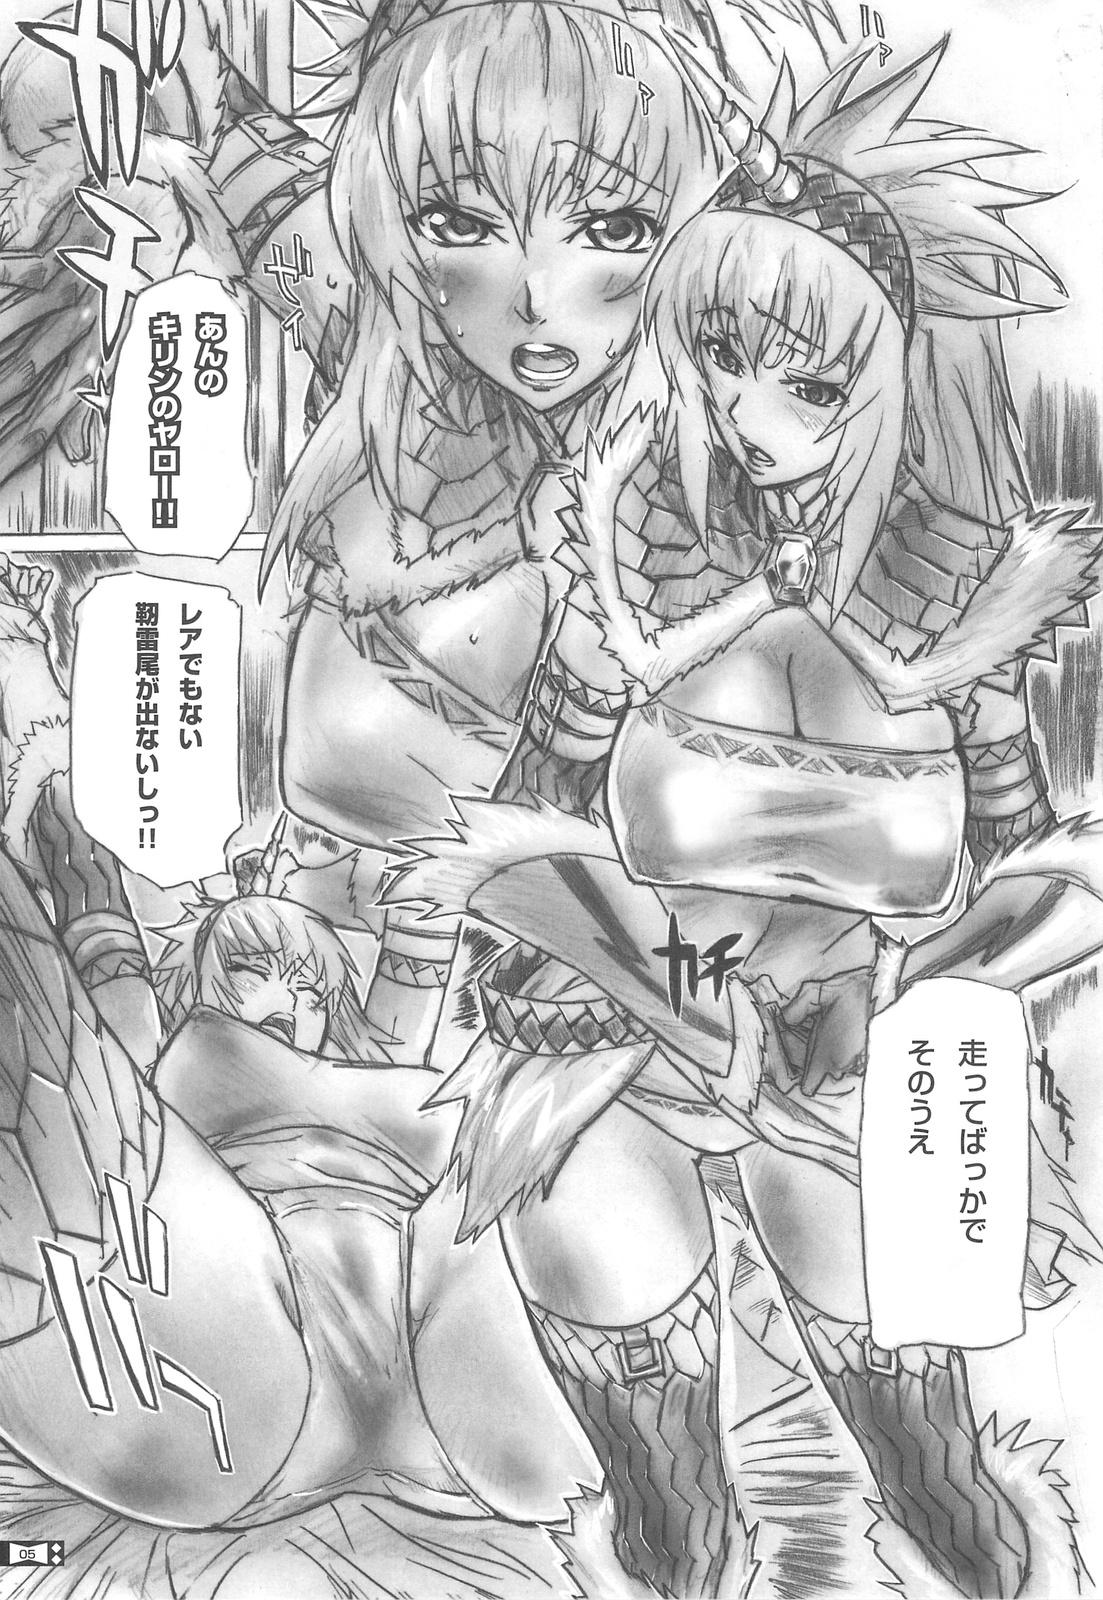 Parties Shibire Wana - Monster hunter Spying - Page 5